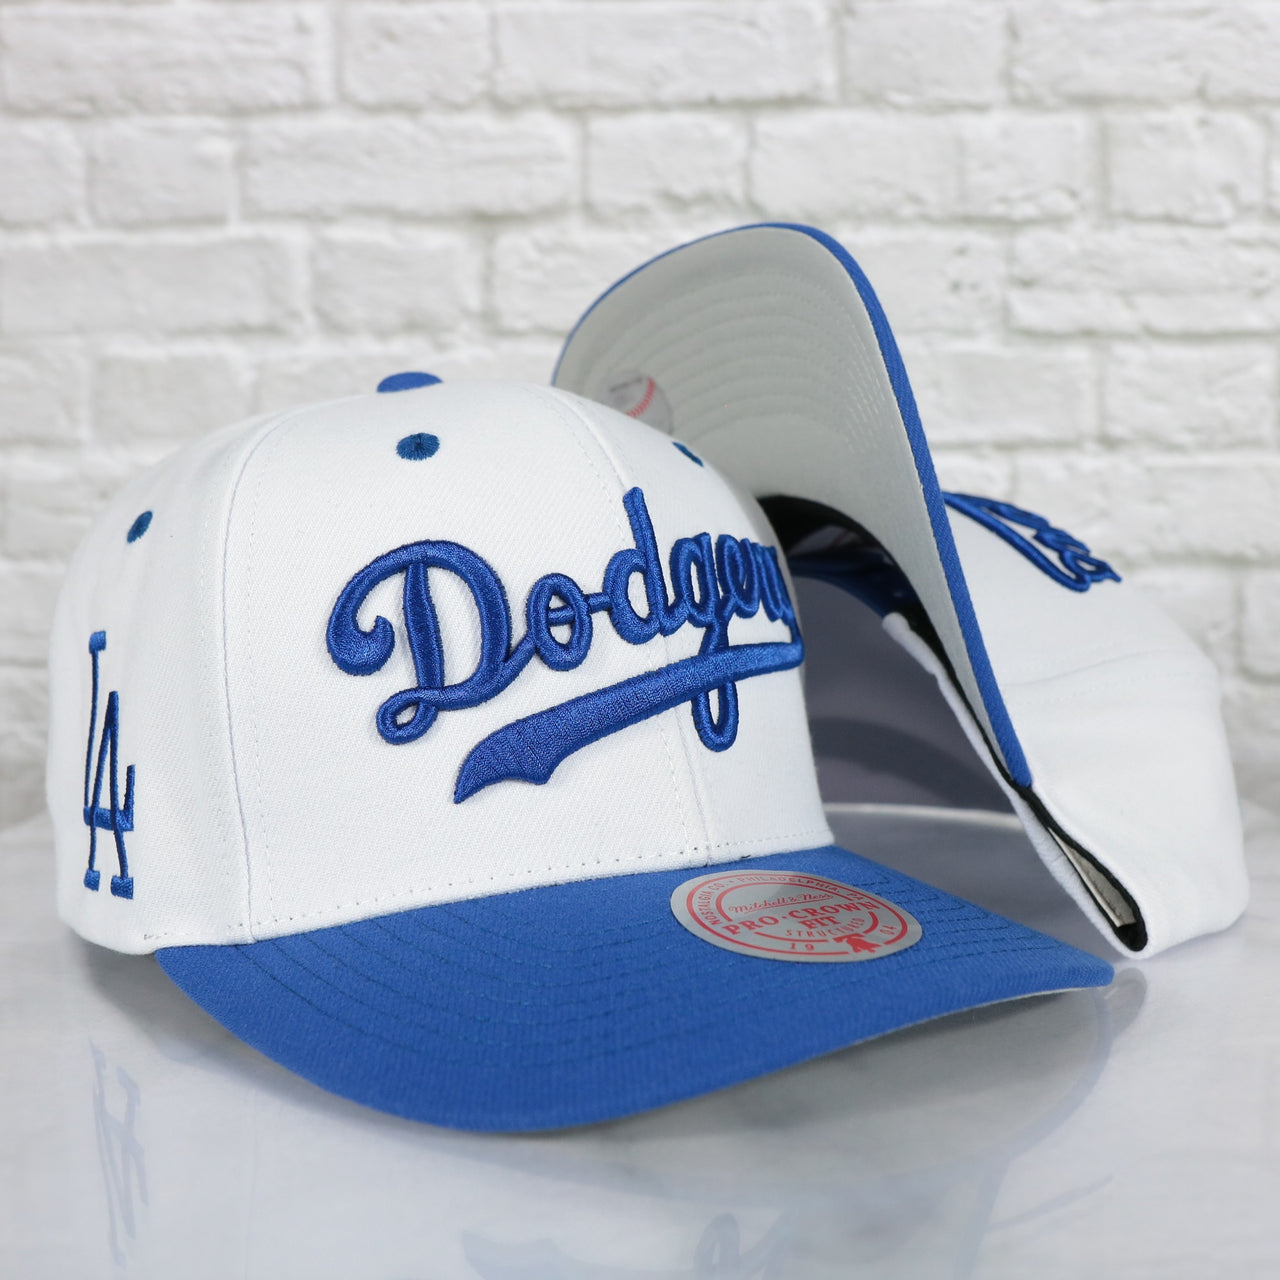 Los Angeles Dodgers Cooperstown "Dodgers" Jersey Script 1958 Dodgers logo side patch Evergreen Pro | White/Royal Snapback Hat